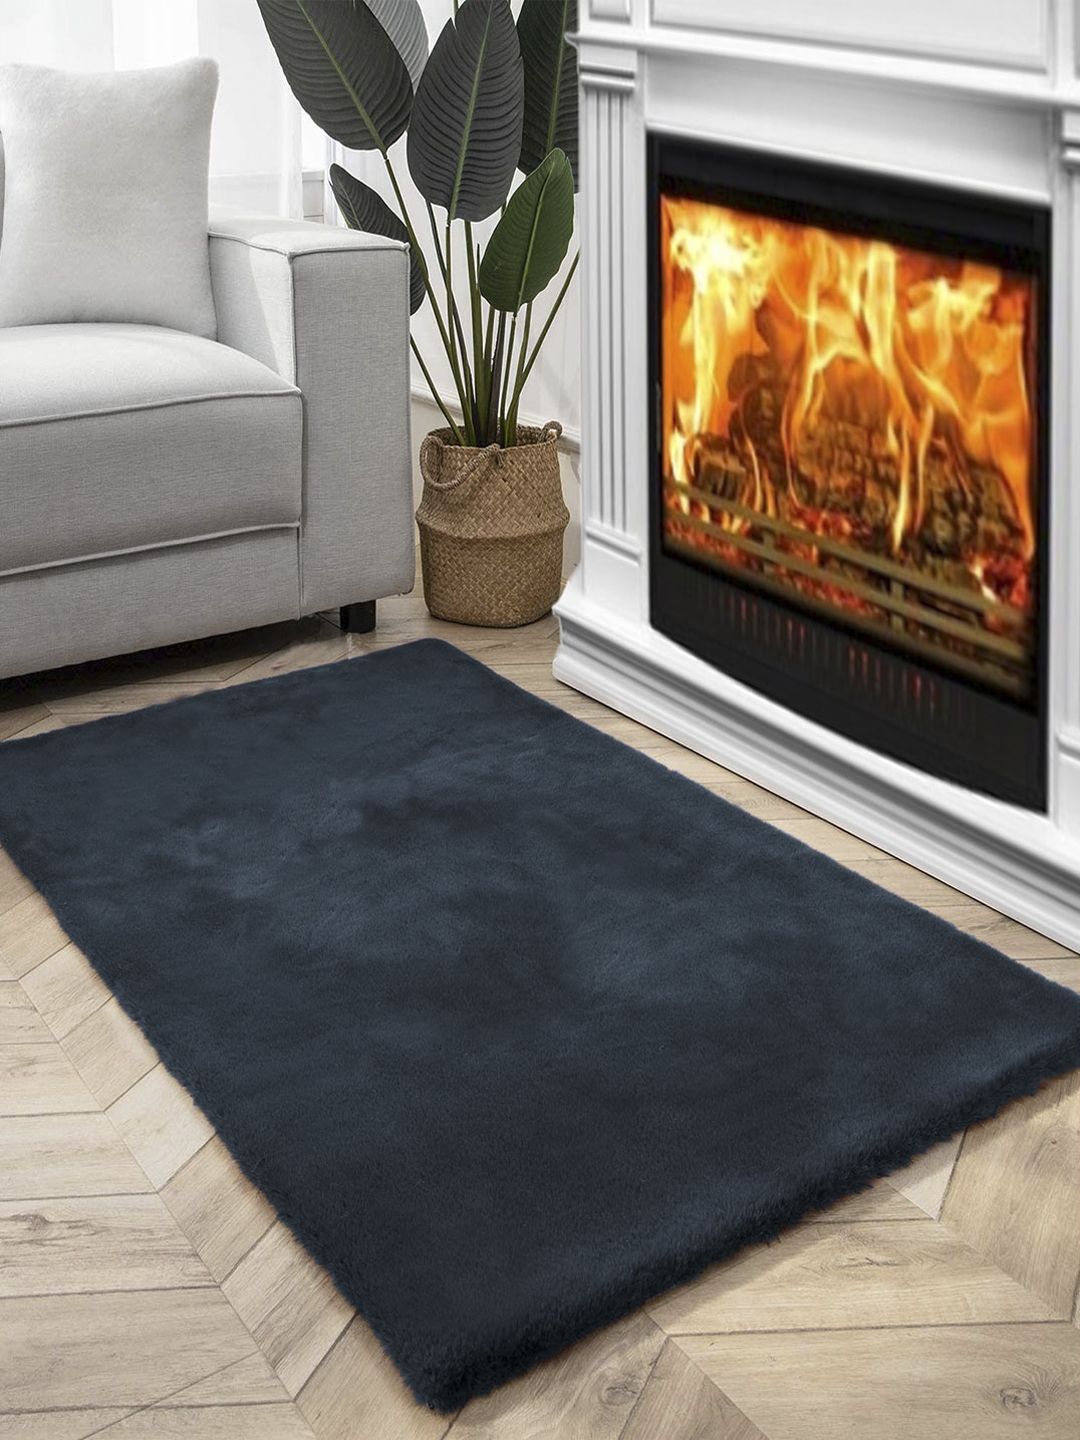 FI Black Polycotton Solid Bath Rugs Price in India